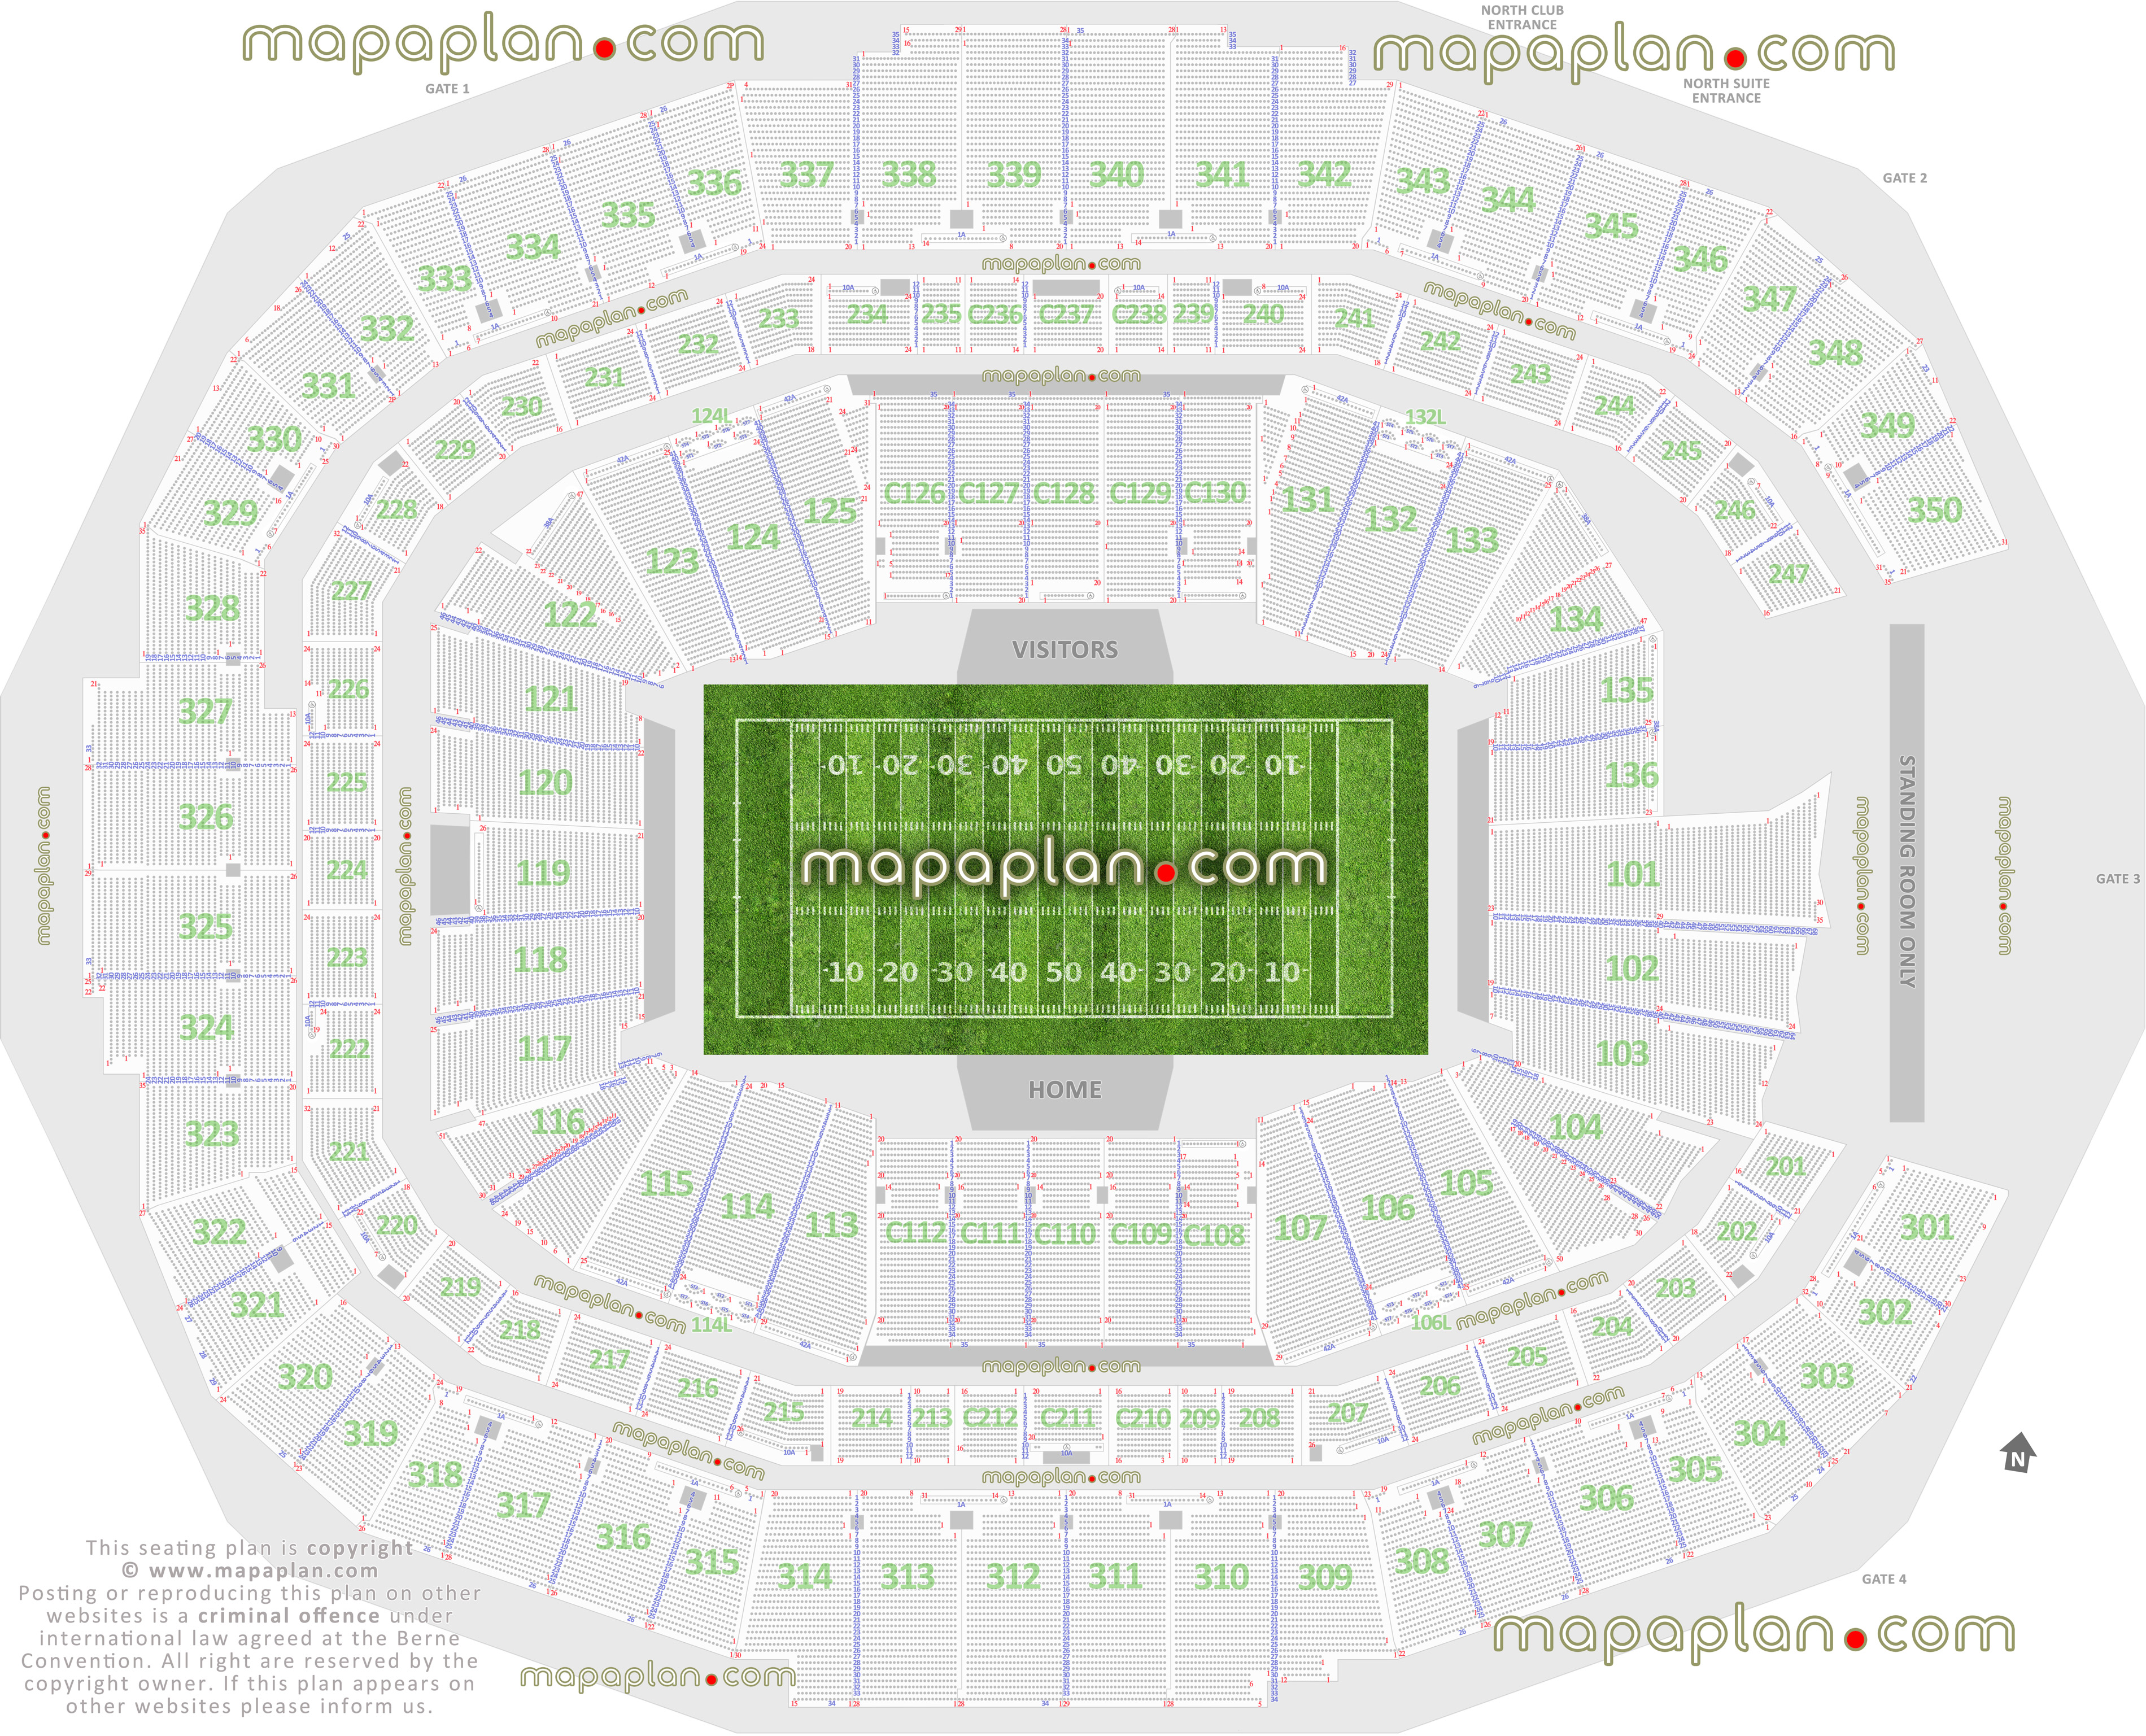 Atlanta Mercedes-Benz Stadium seating chart plan seating plan falcons football exact section numbers best rows seats selection layout 100 club 200 mezzanine 300 upper level sections